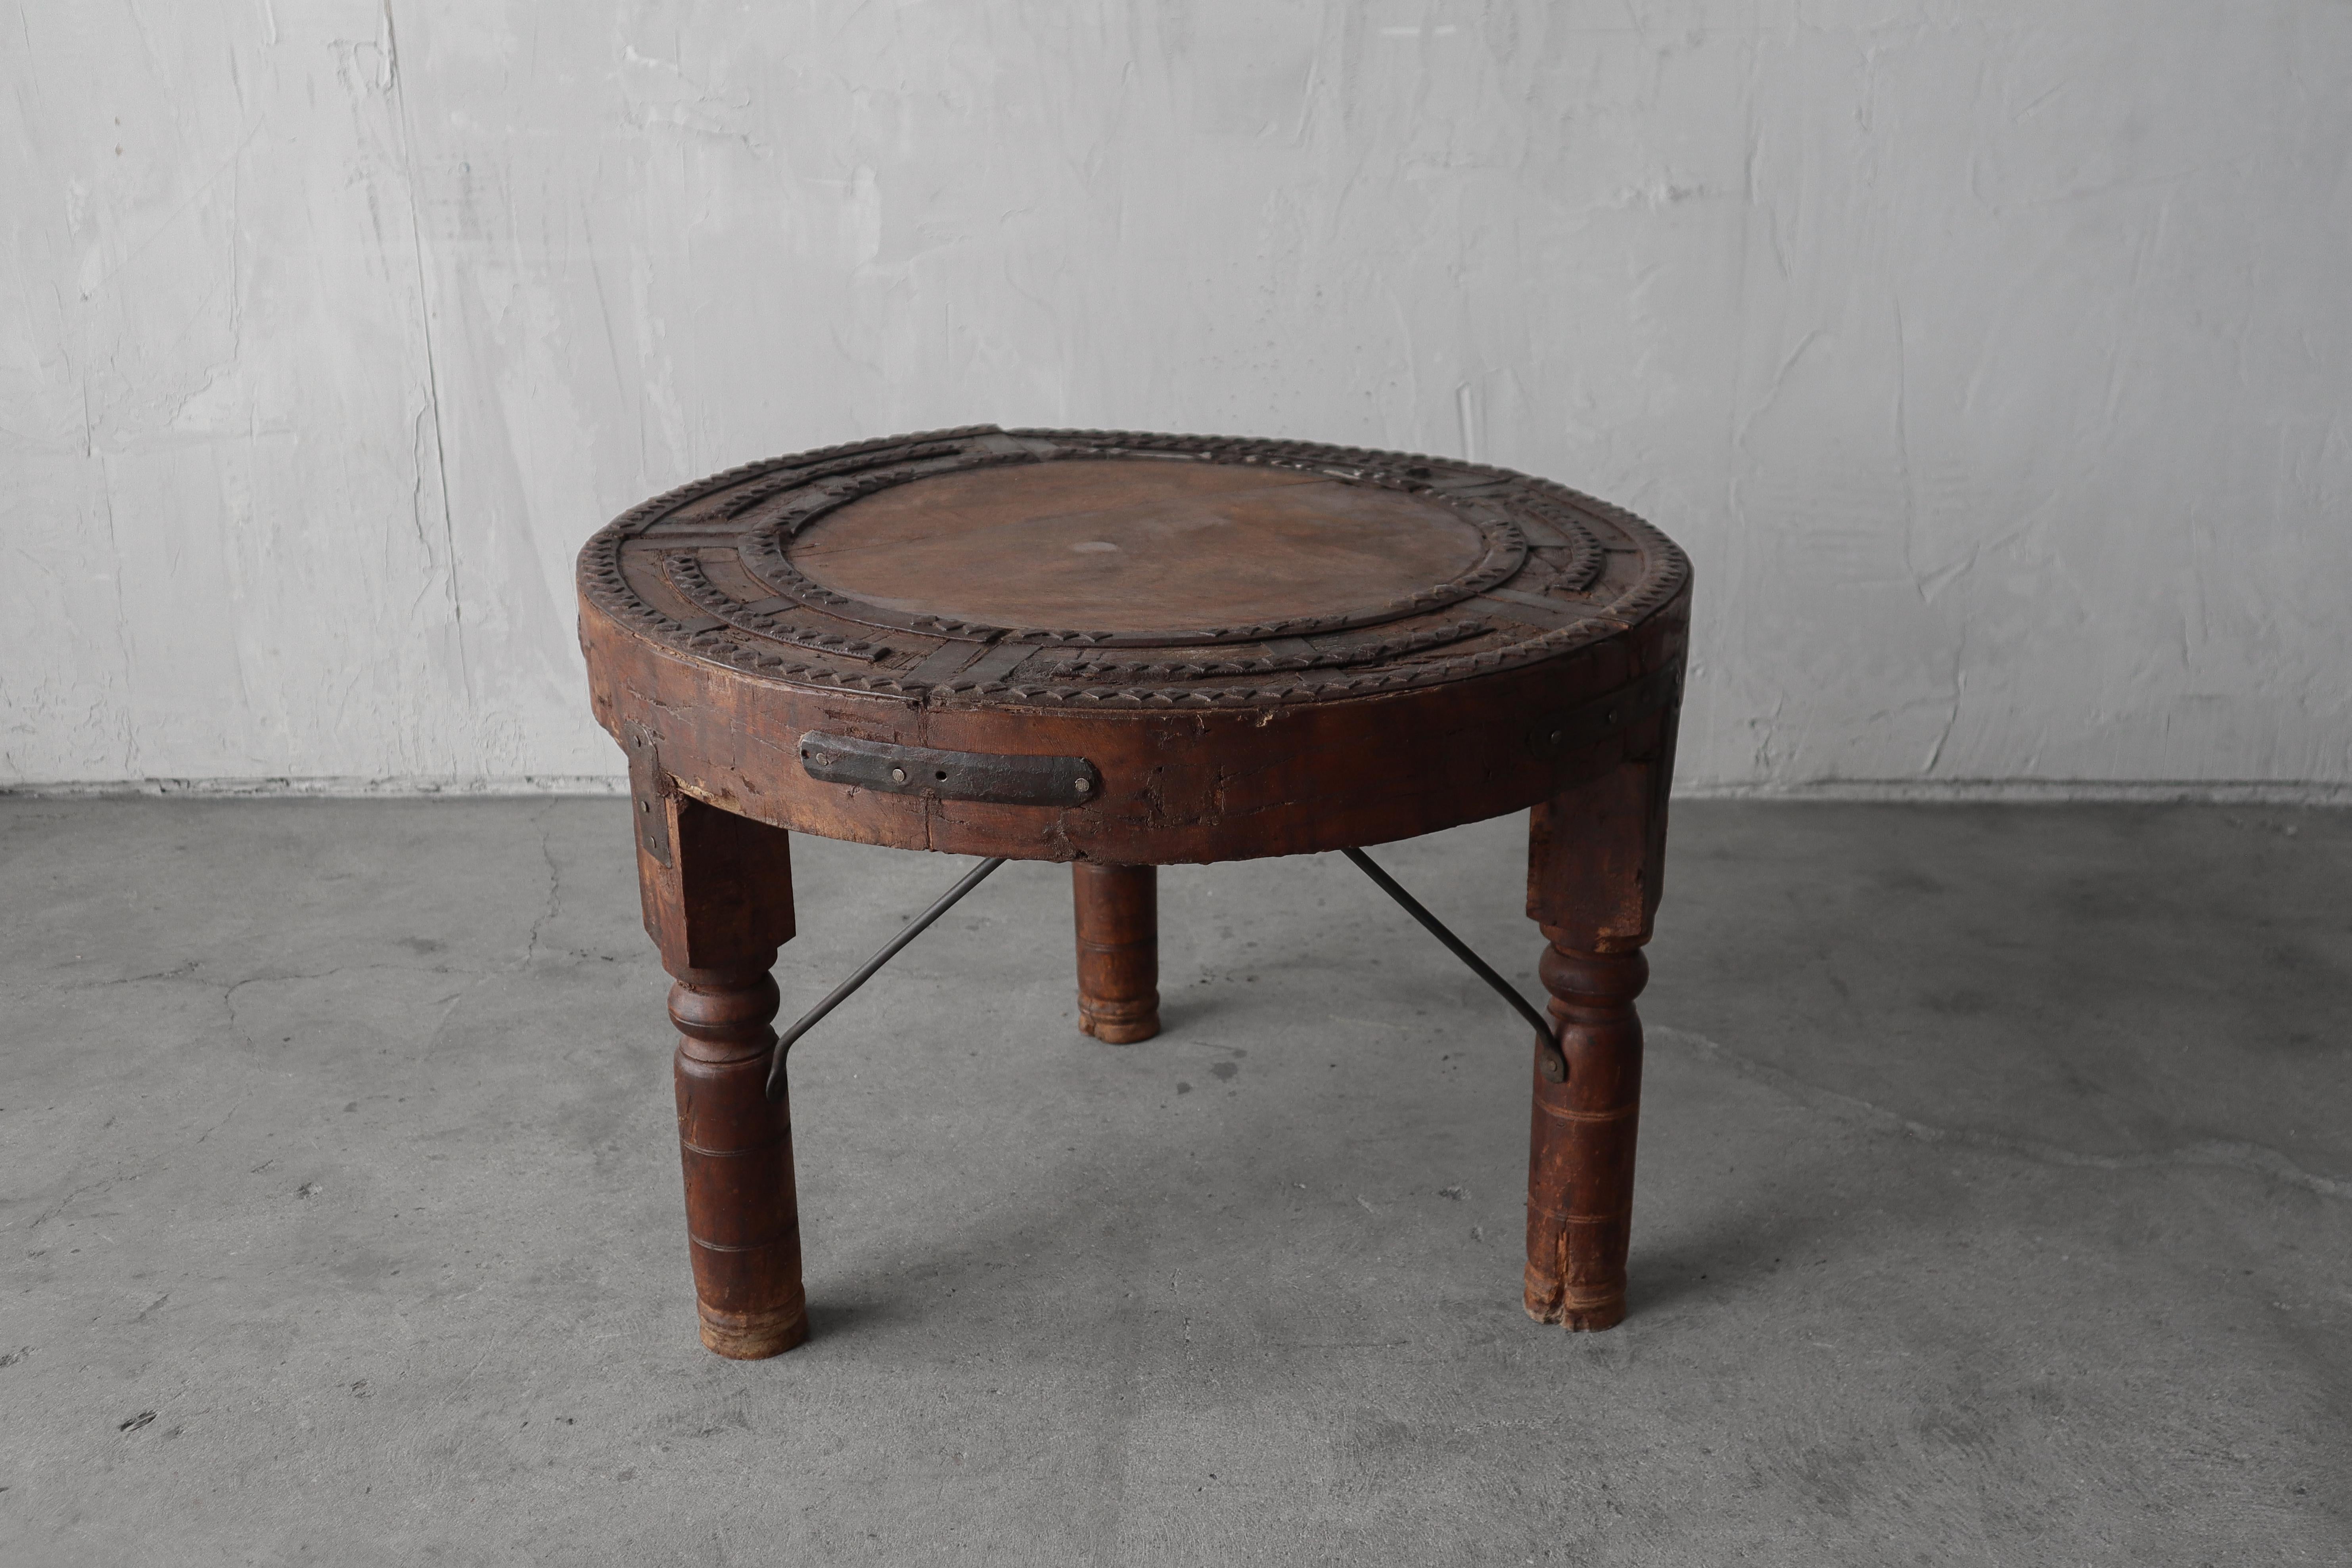 Great primitive handmade bullock cart wheel table.  Perfect accent piece for Wabi Sabi or any eclectic decor. 

Everything about this piece exudes age and character. The wood is beautifully patinaed.  One small missing piece of wood in the top. 